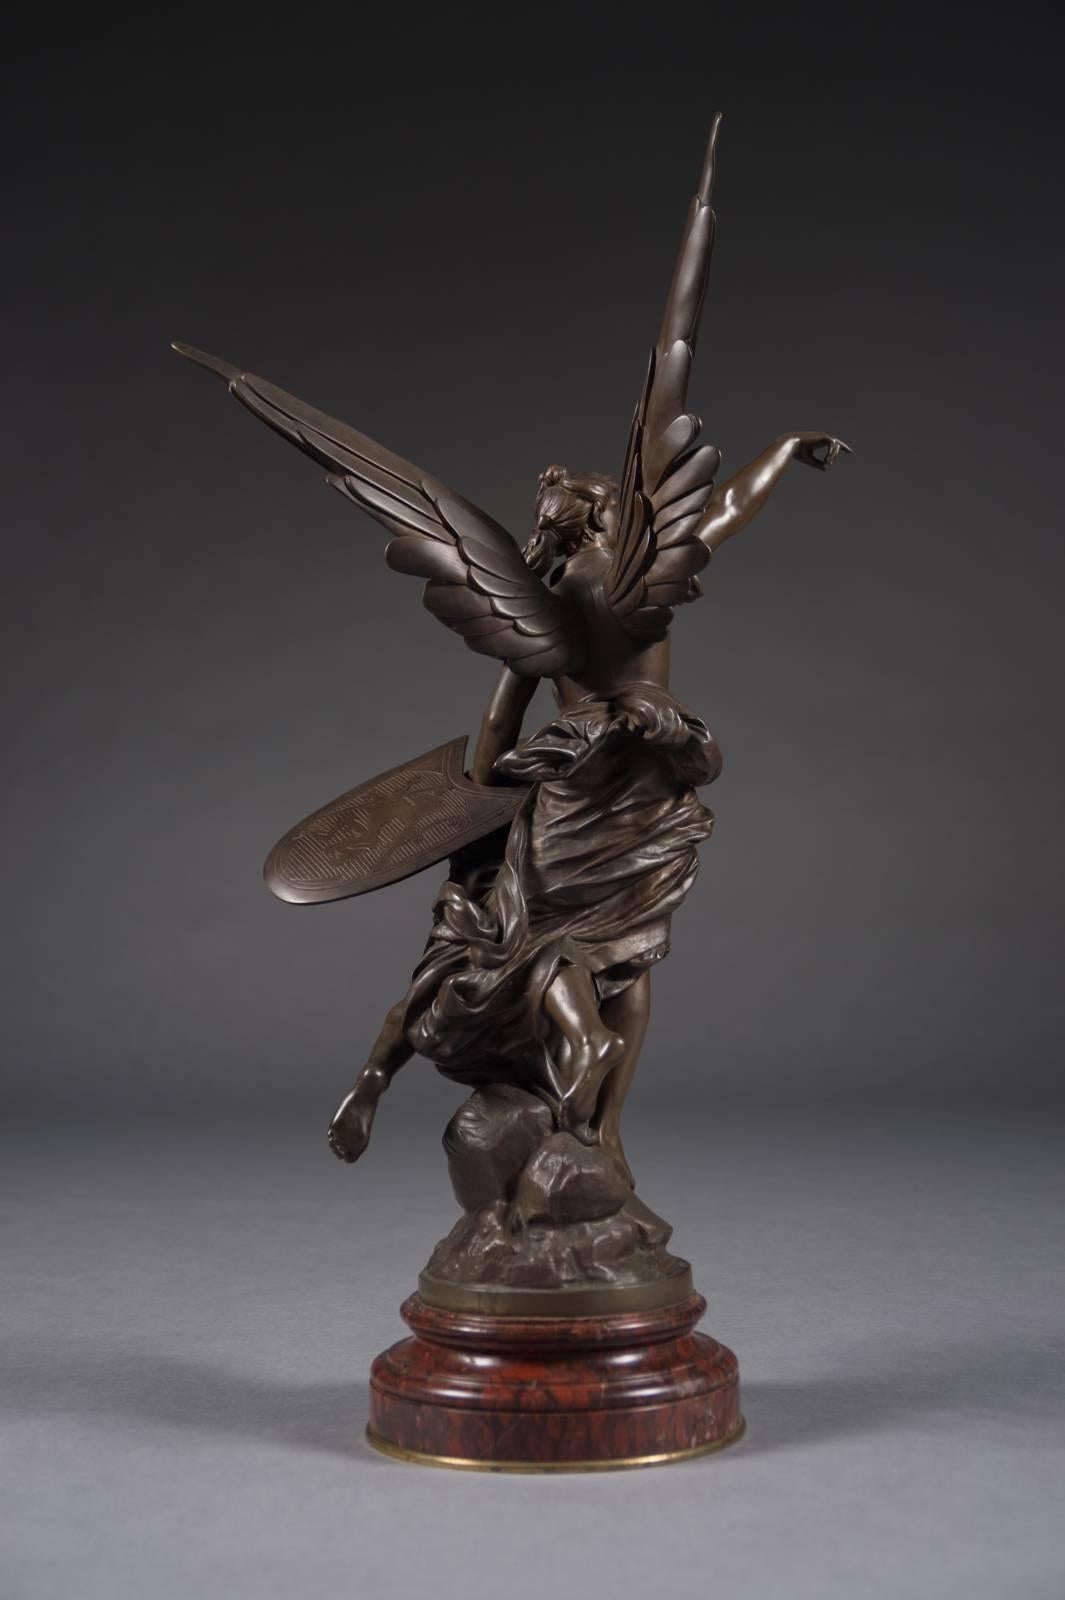 A very fine French antique patinated bronze figural group titled Pro Patria by Edouard Drouot 
(French, 1859-1945) late 19th century.

Depicting a figure of winged Victory with a soldier in attendance holding a sword and shield, on circular rouge